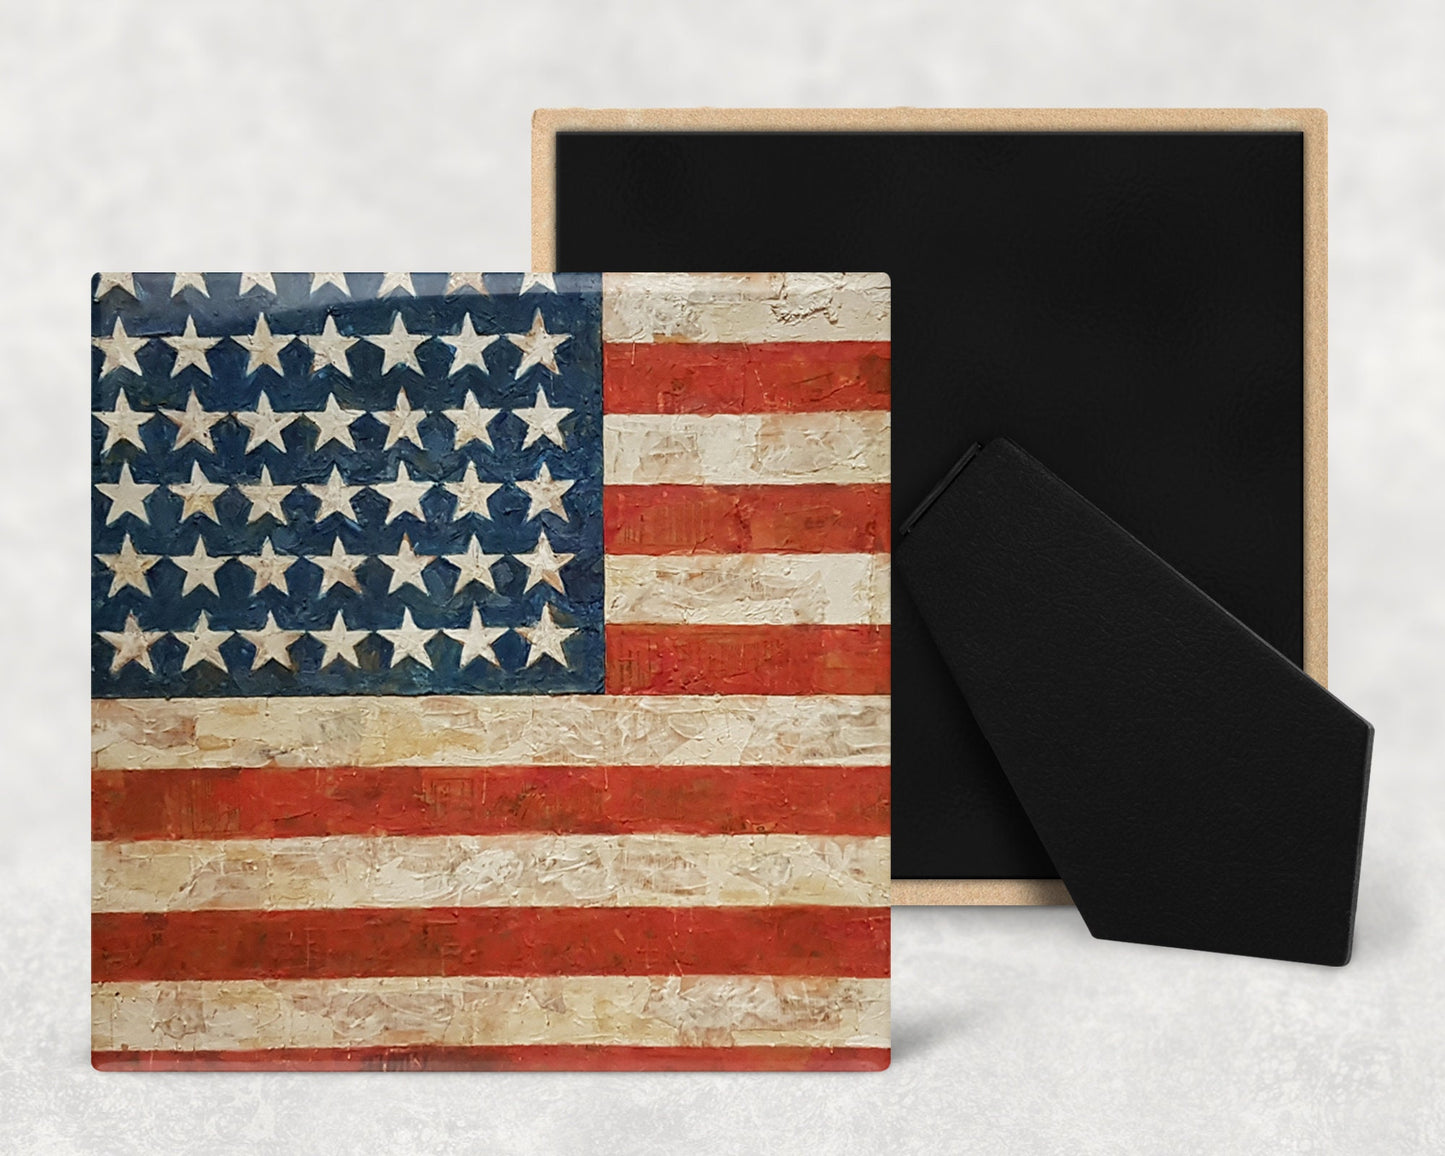 Painted Look American Flag Decorative Ceramic Tile with Optional Easel Back - Available in 3 Sizes